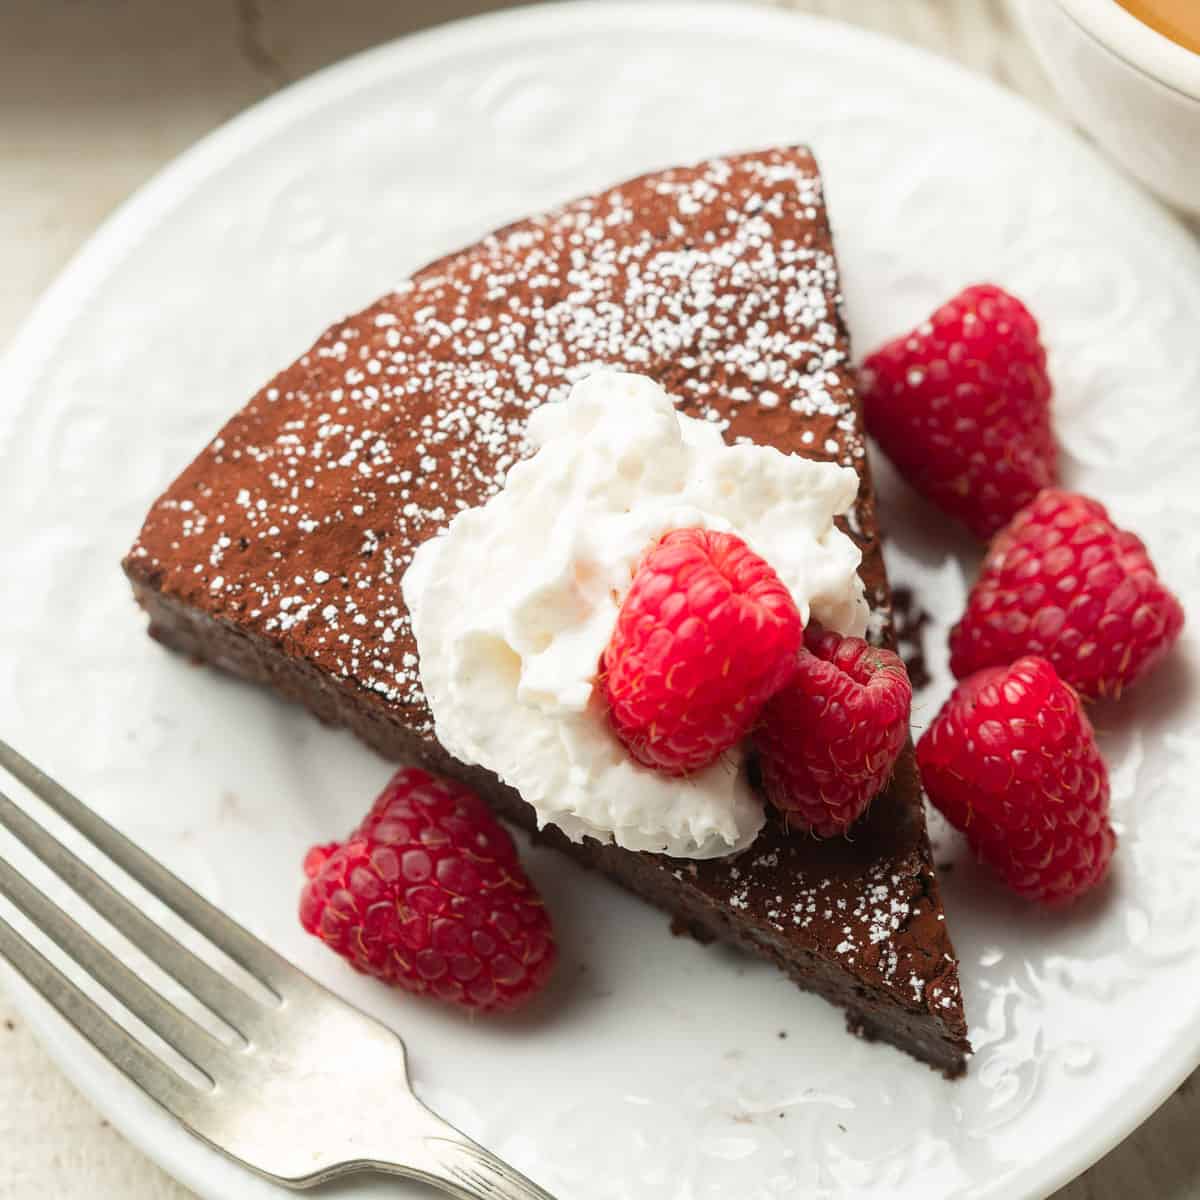 Vegan Chocolate Torte slice on a dish with raspberries and whipped cream.